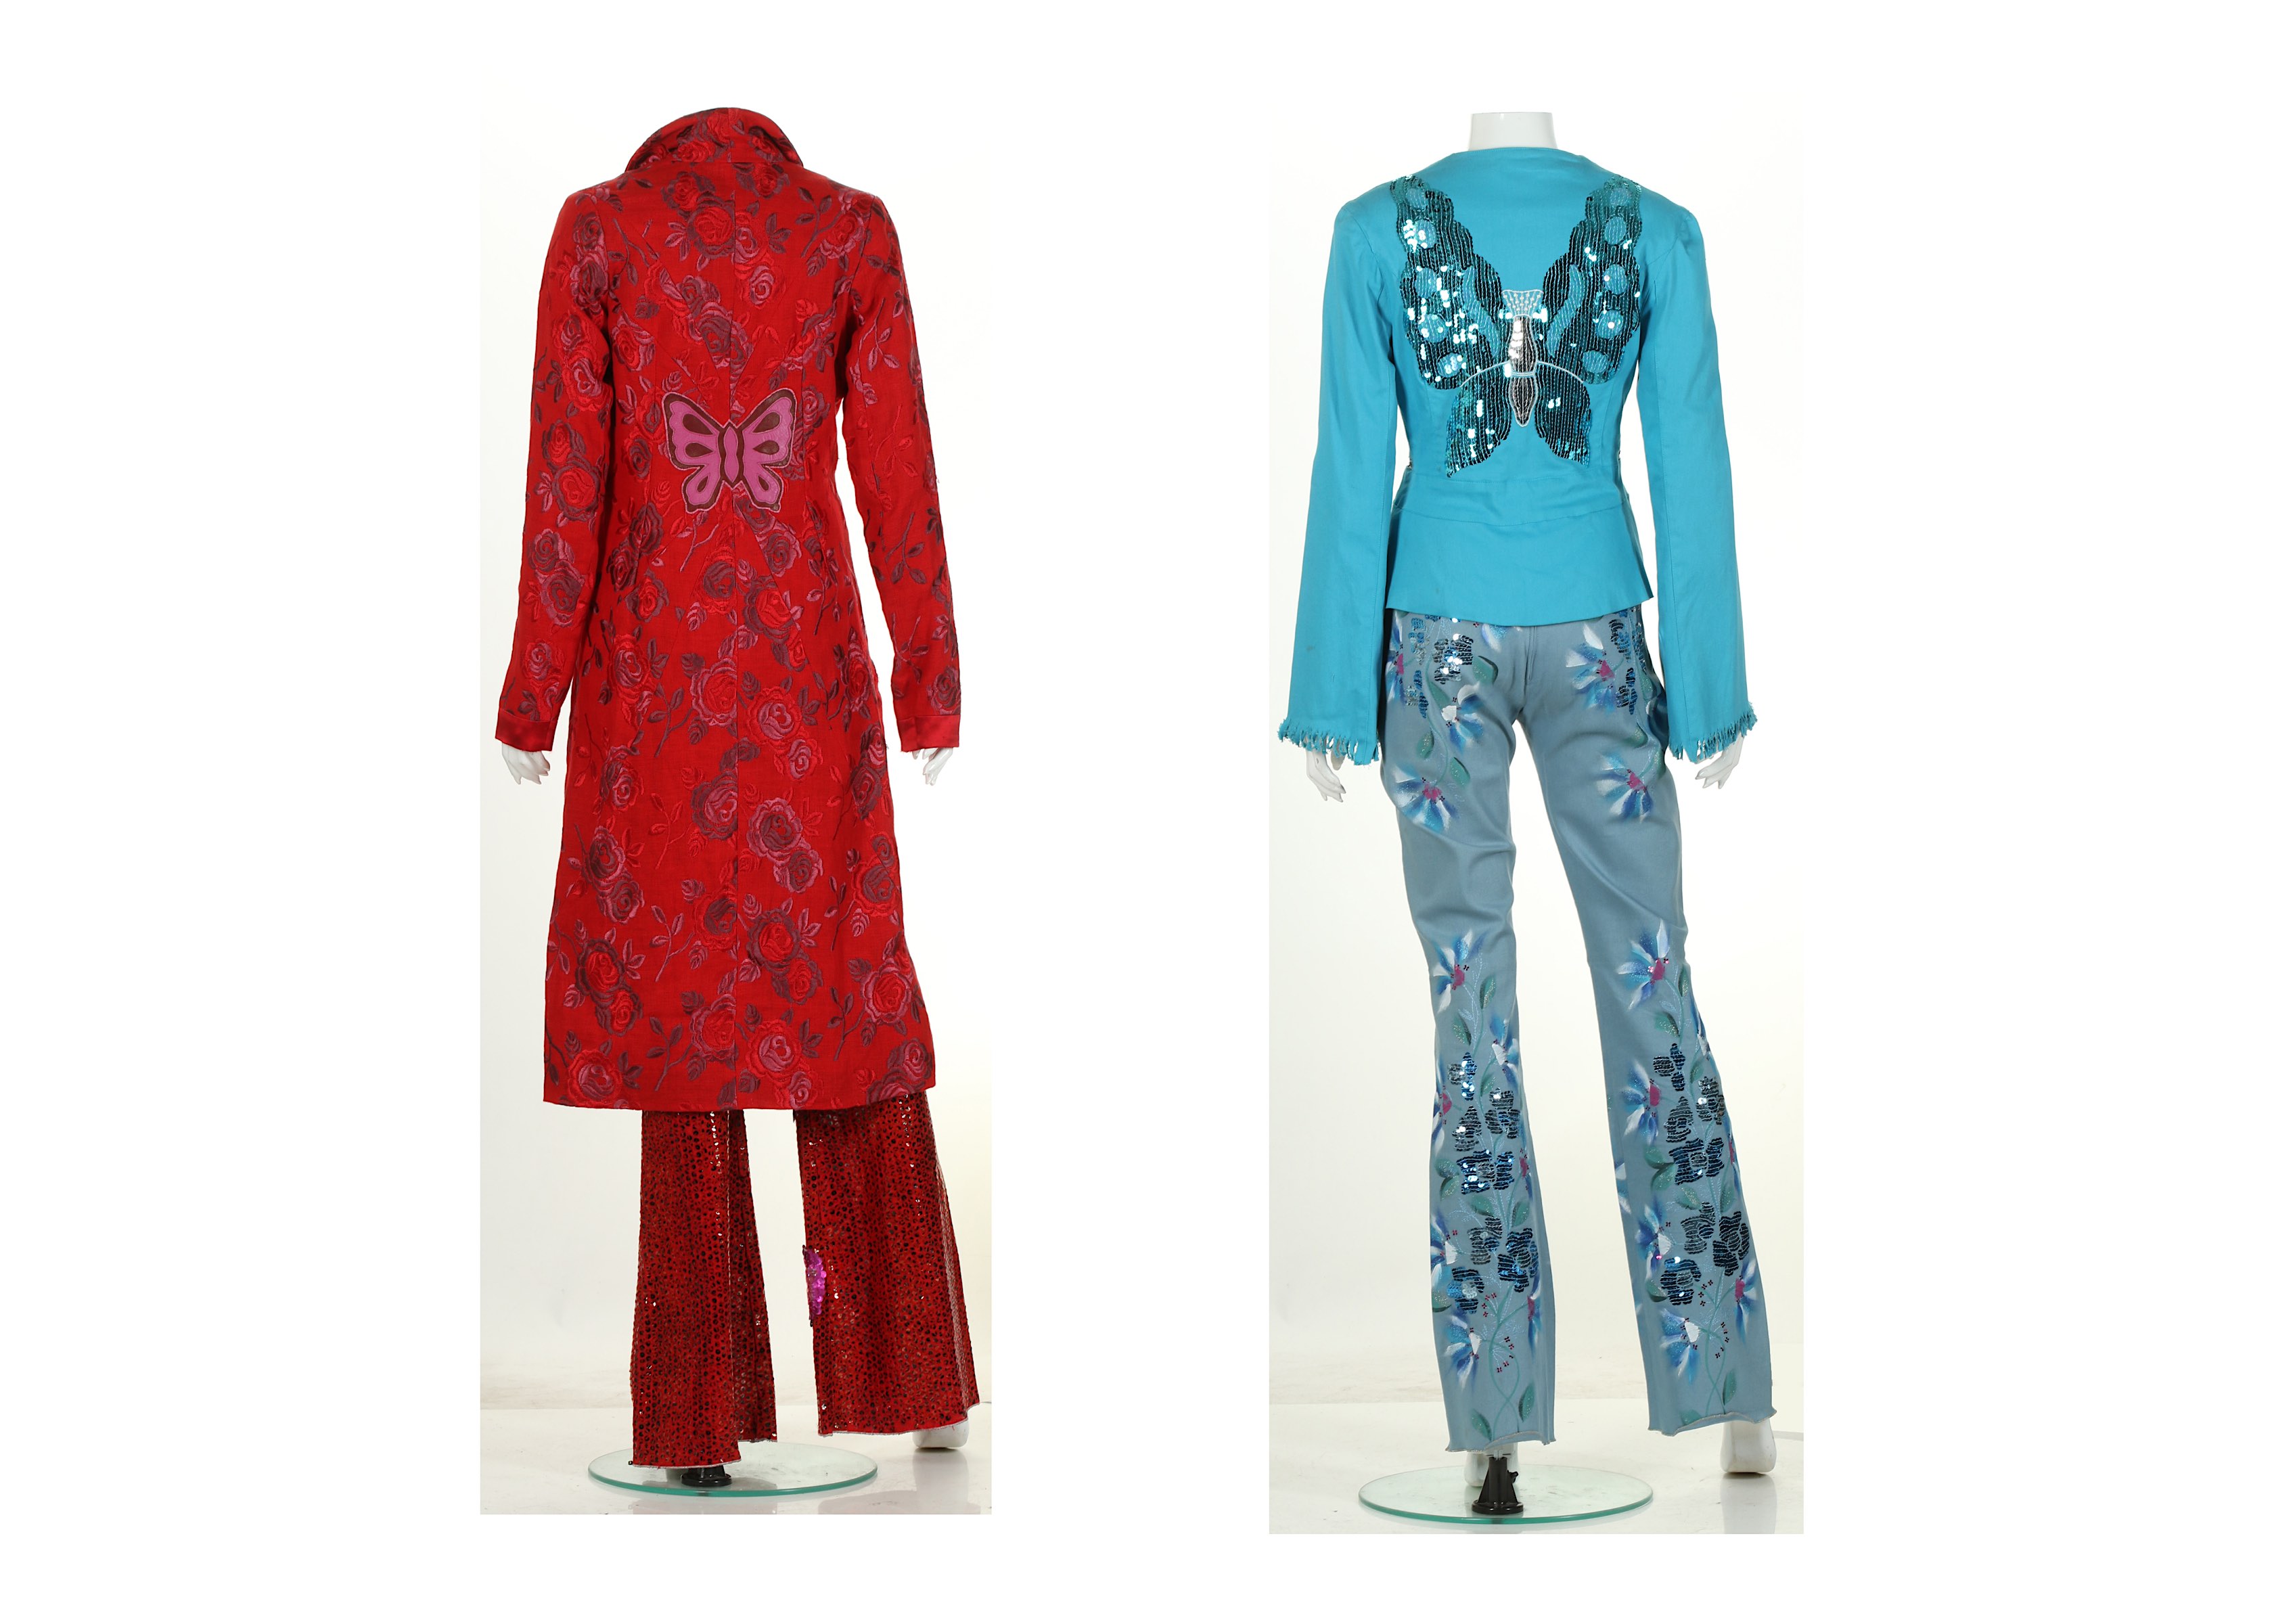 Voyage Blue and Red Ensembles, late 1990s, to include a red dress coat with leather butterfly to - Image 4 of 7